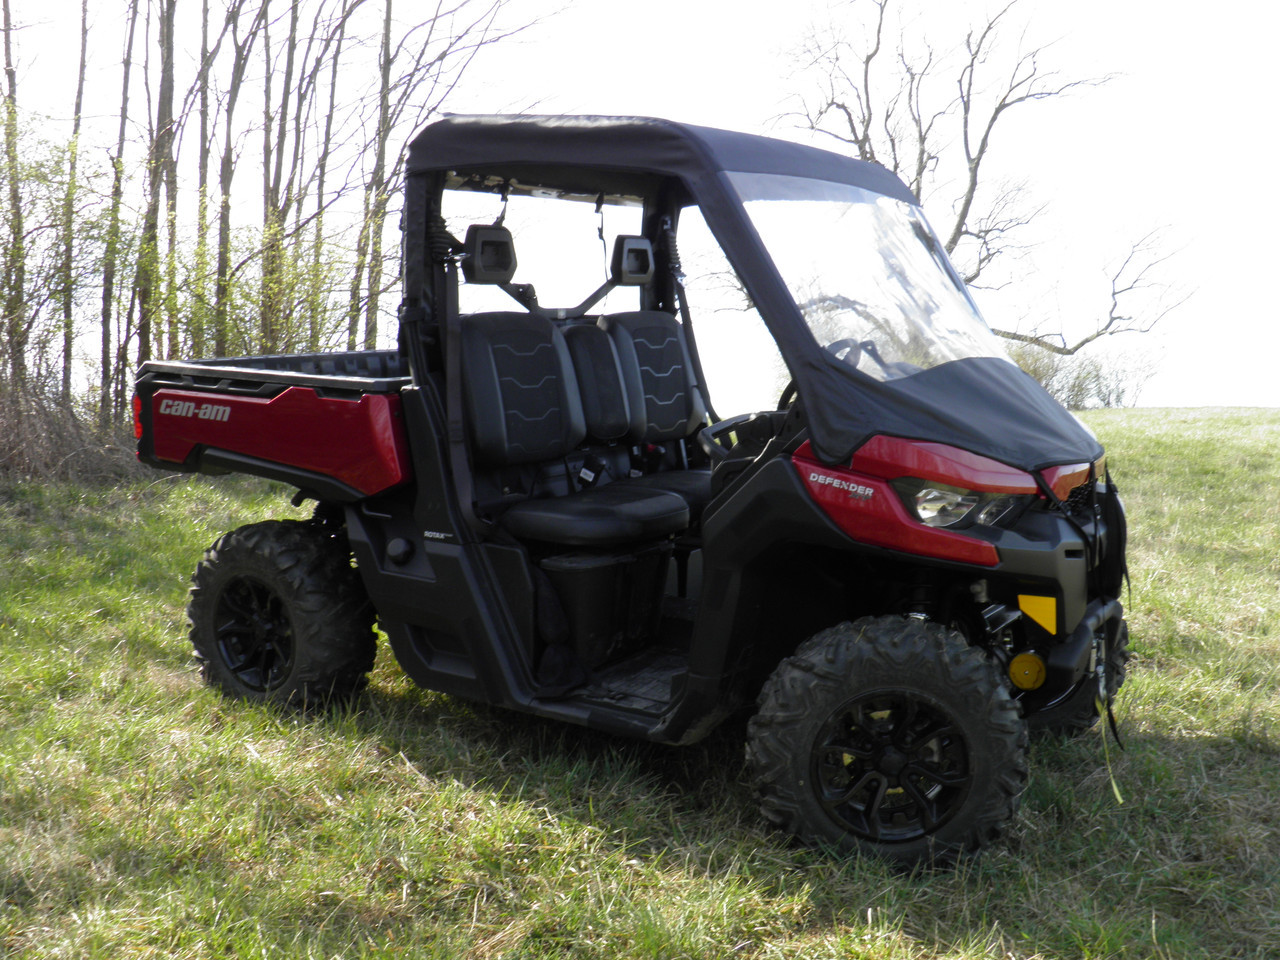 3 Star side x side can-am defender vinyl windshield and roof front and side angle view